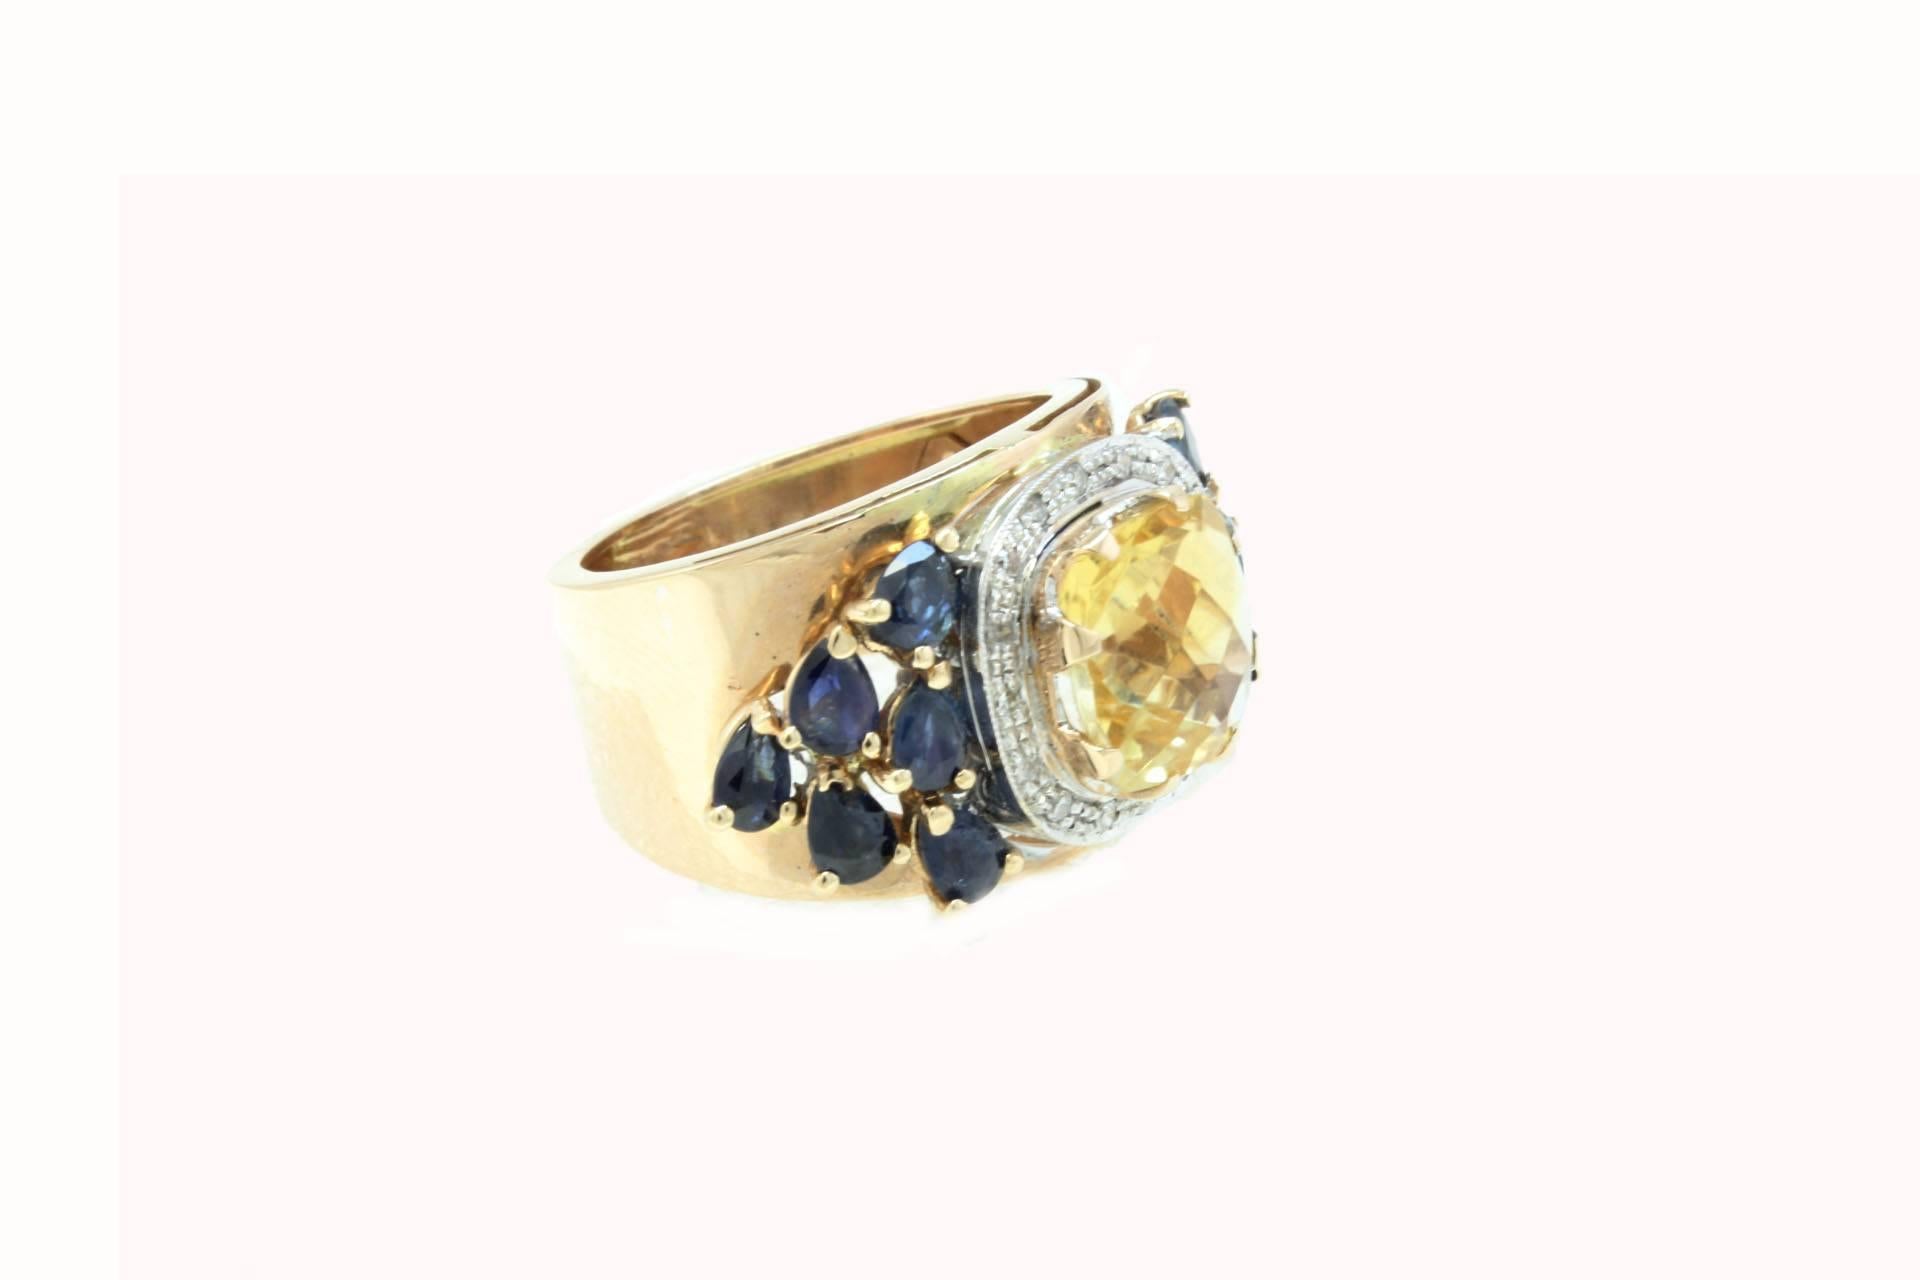 Amazing band ring composed of shiny central topaz surrounded of blues sapphires and a frame of diamonds, all is mounted in 14Kt rose gold,
Tot weight 6.5 g
Ring size : ITA 14.5 - French 54.50 - US 7 - UK O
Diamonds 0.13 ct
Topaz 2.92 ct
Blue